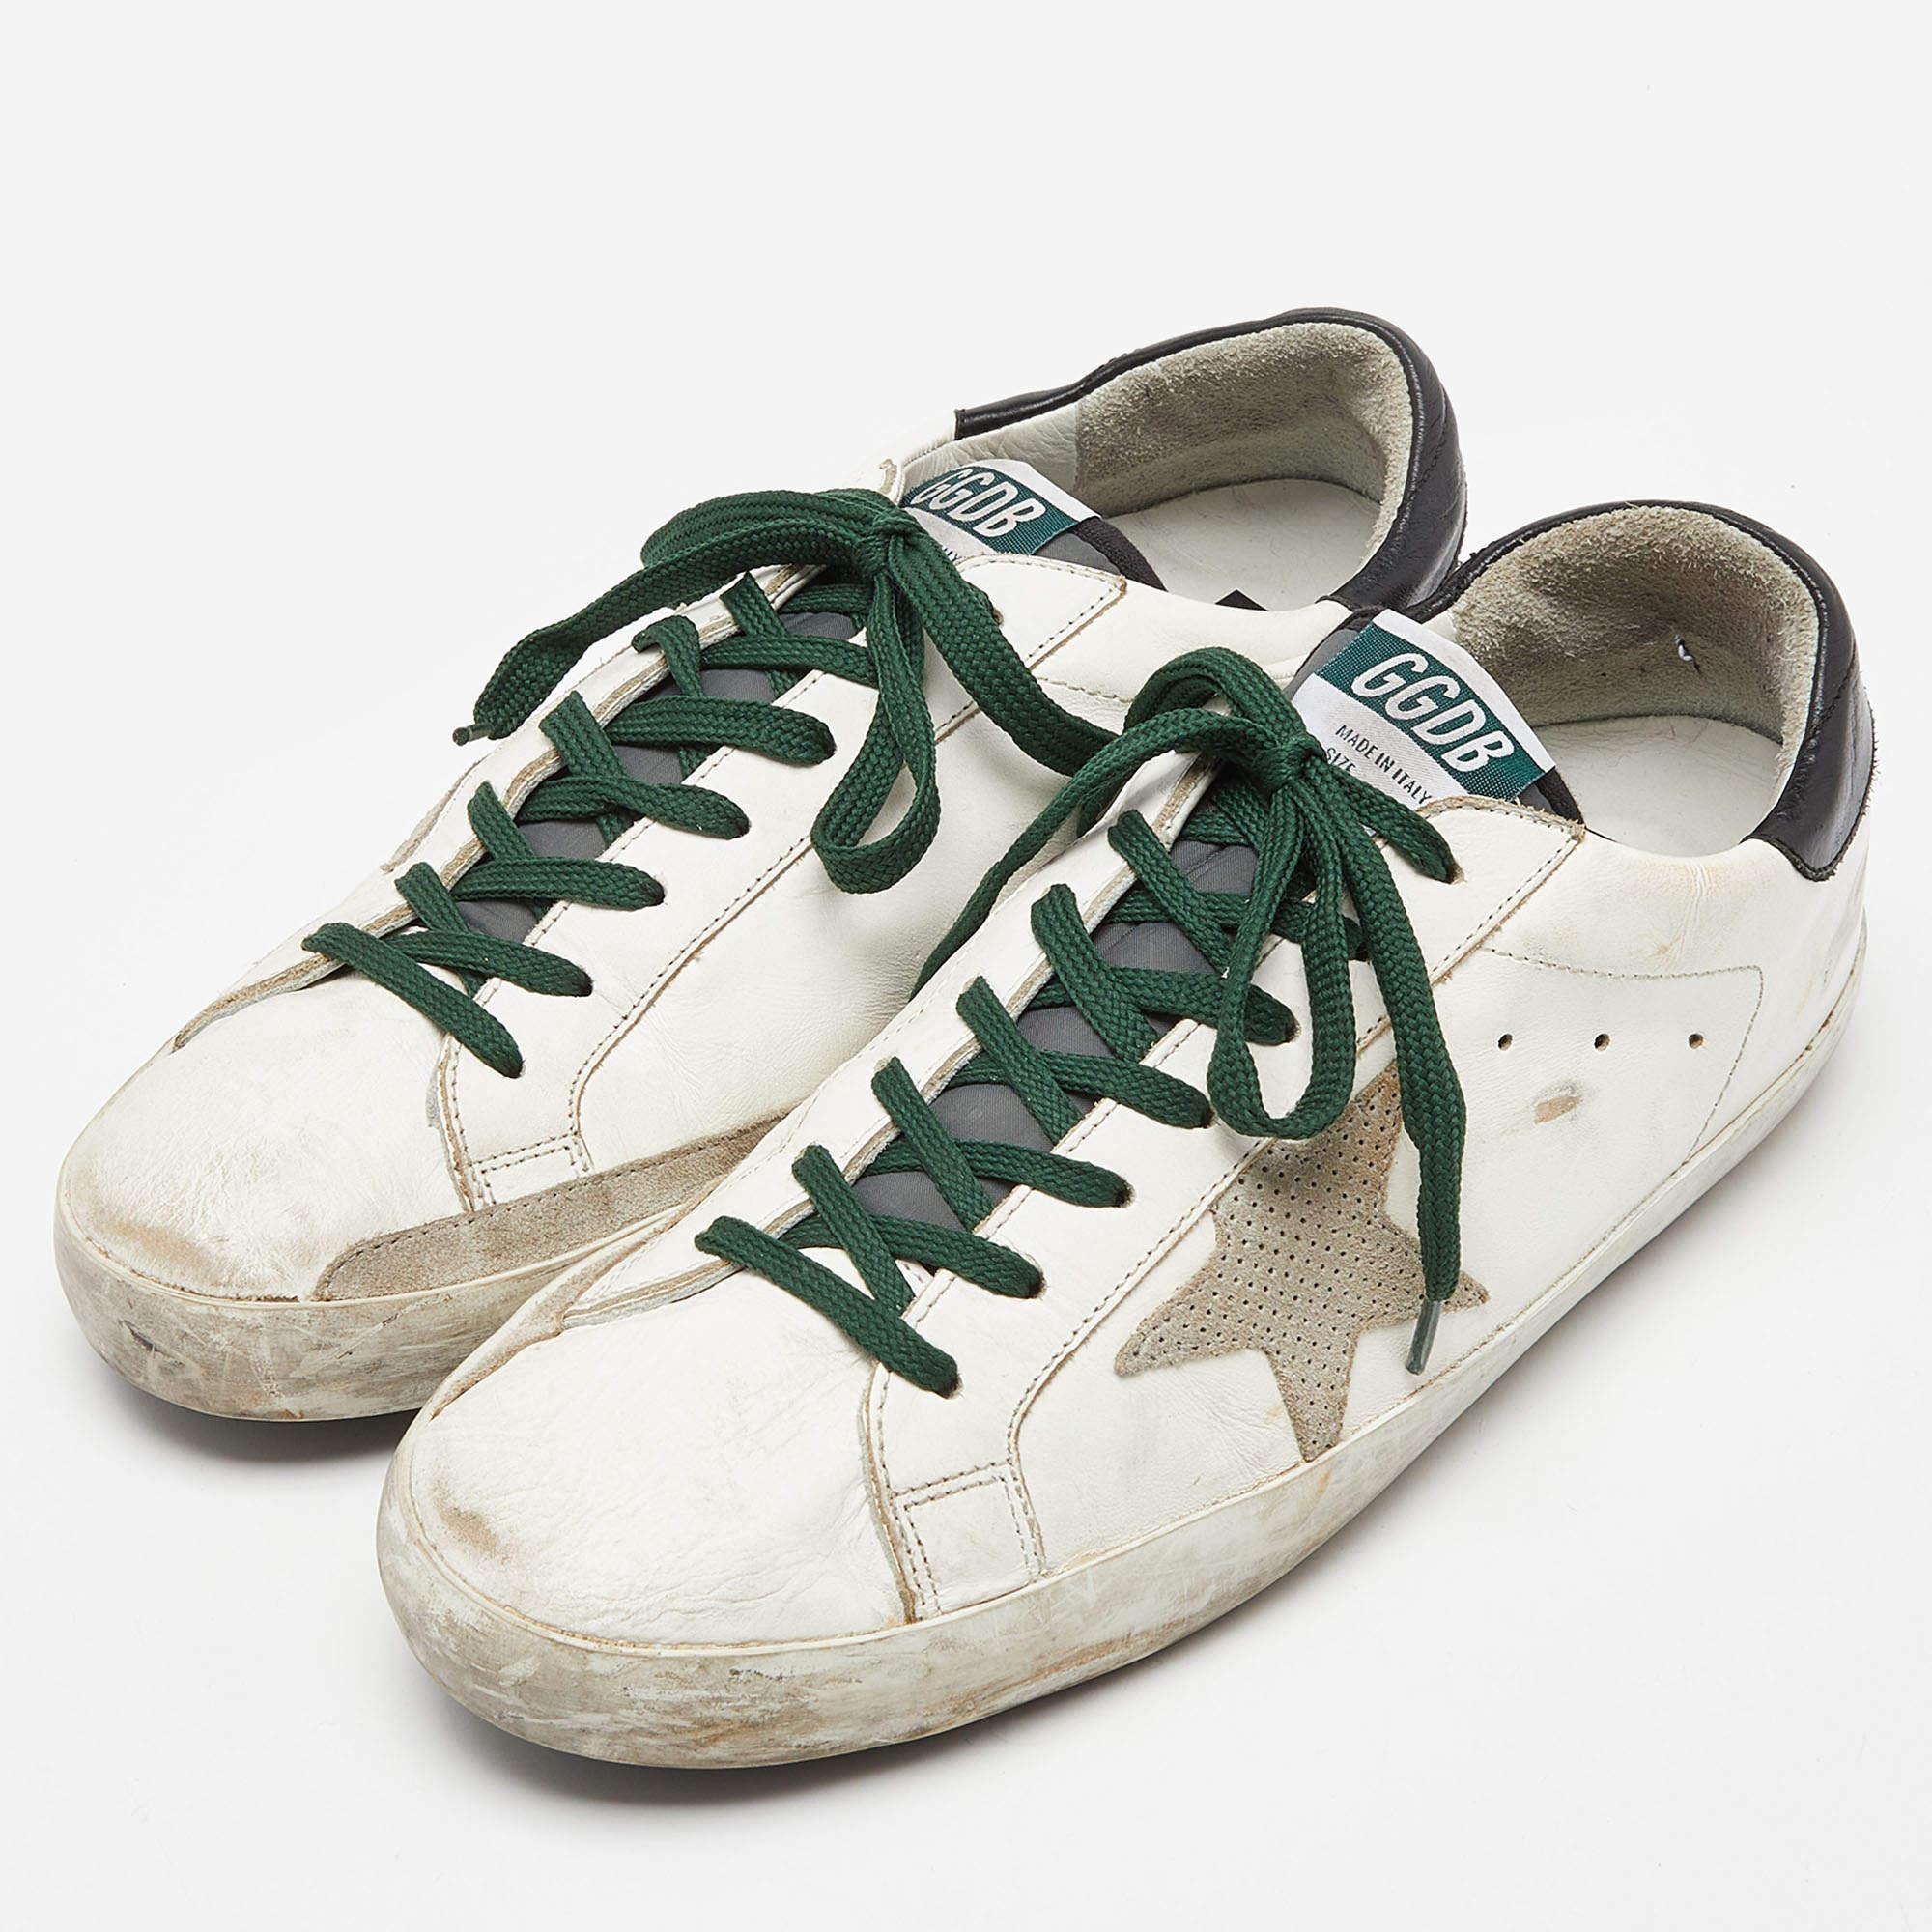 Golden Goose White Leather And Grey Suede Hi Star Sneakers Size 43 For Sale 4